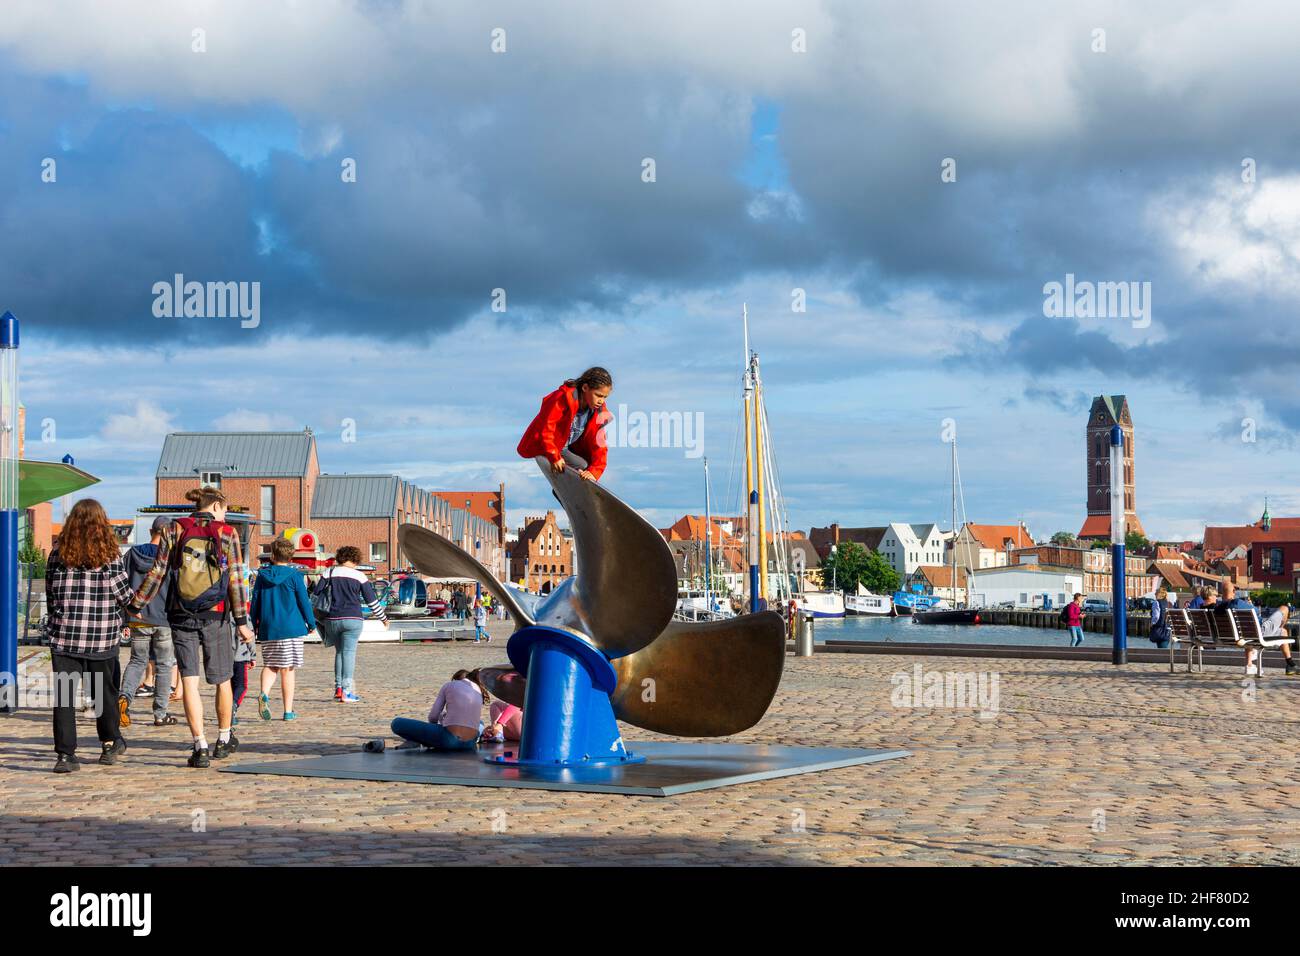 Wismar,  Alter Hafen (Old Port),  historic sail ships,  view to Old Town,  children playing on ship propeller in Ostsee (Baltic Sea),  Mecklenburg-Vorpommern,  Germany Stock Photo